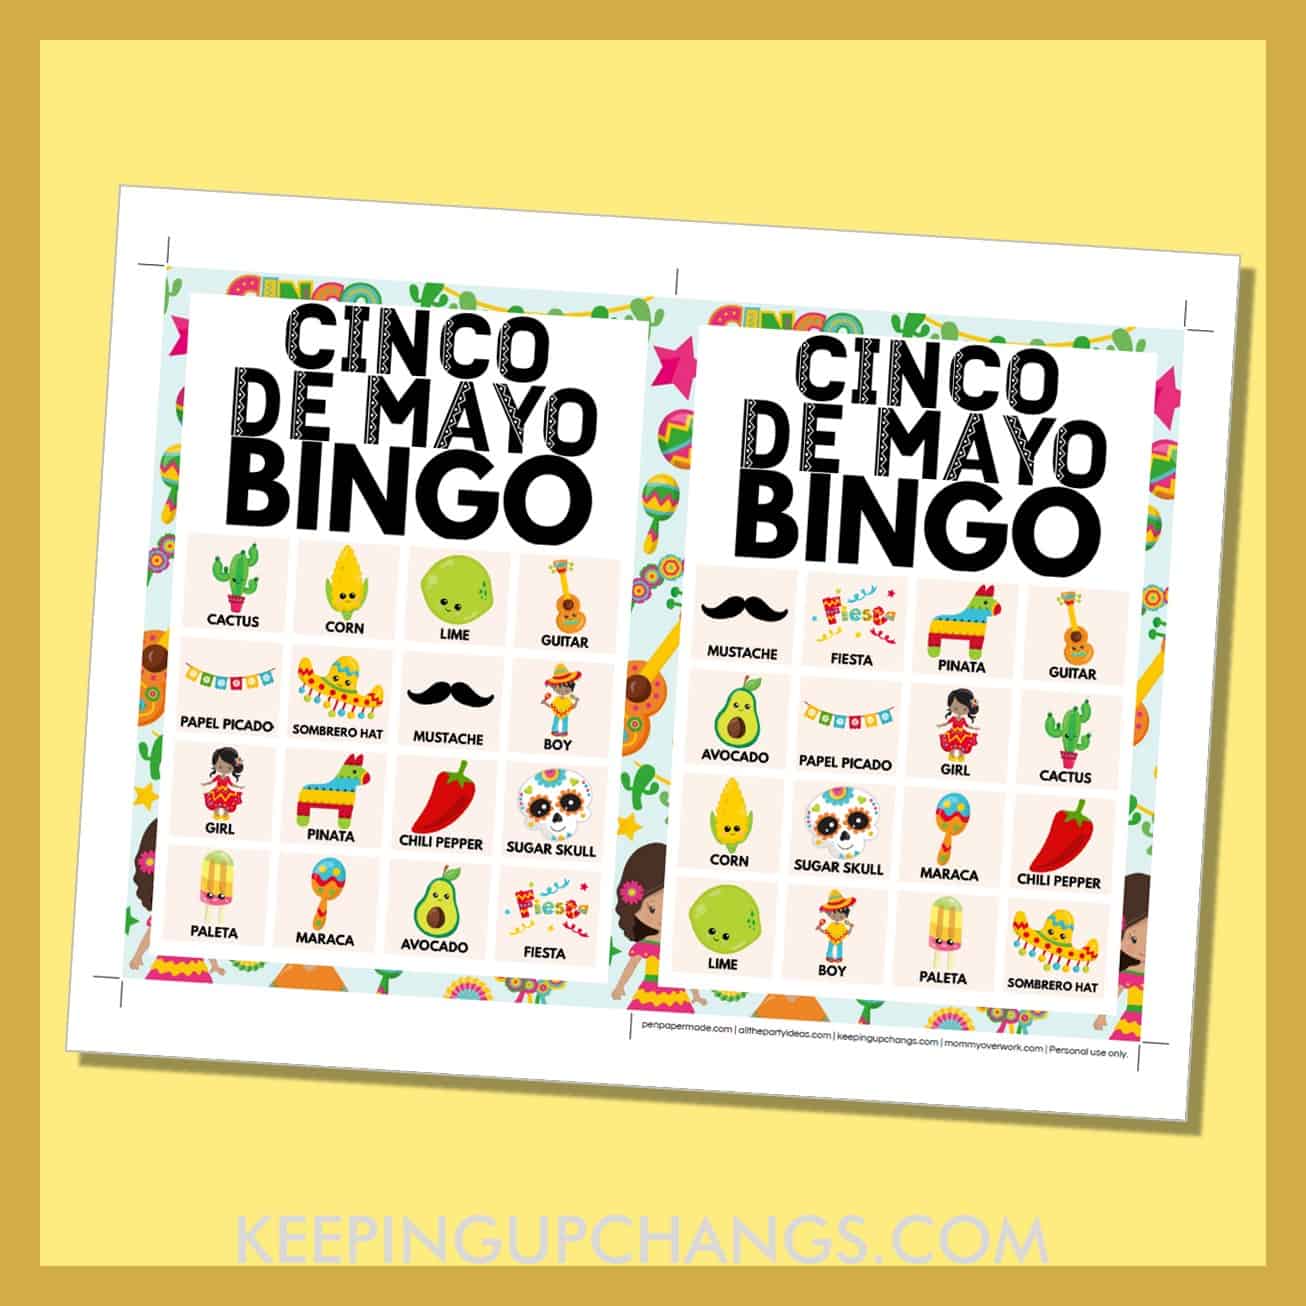 free cinco de mayo bingo card 4x4 5x7 game boards with images and text words.